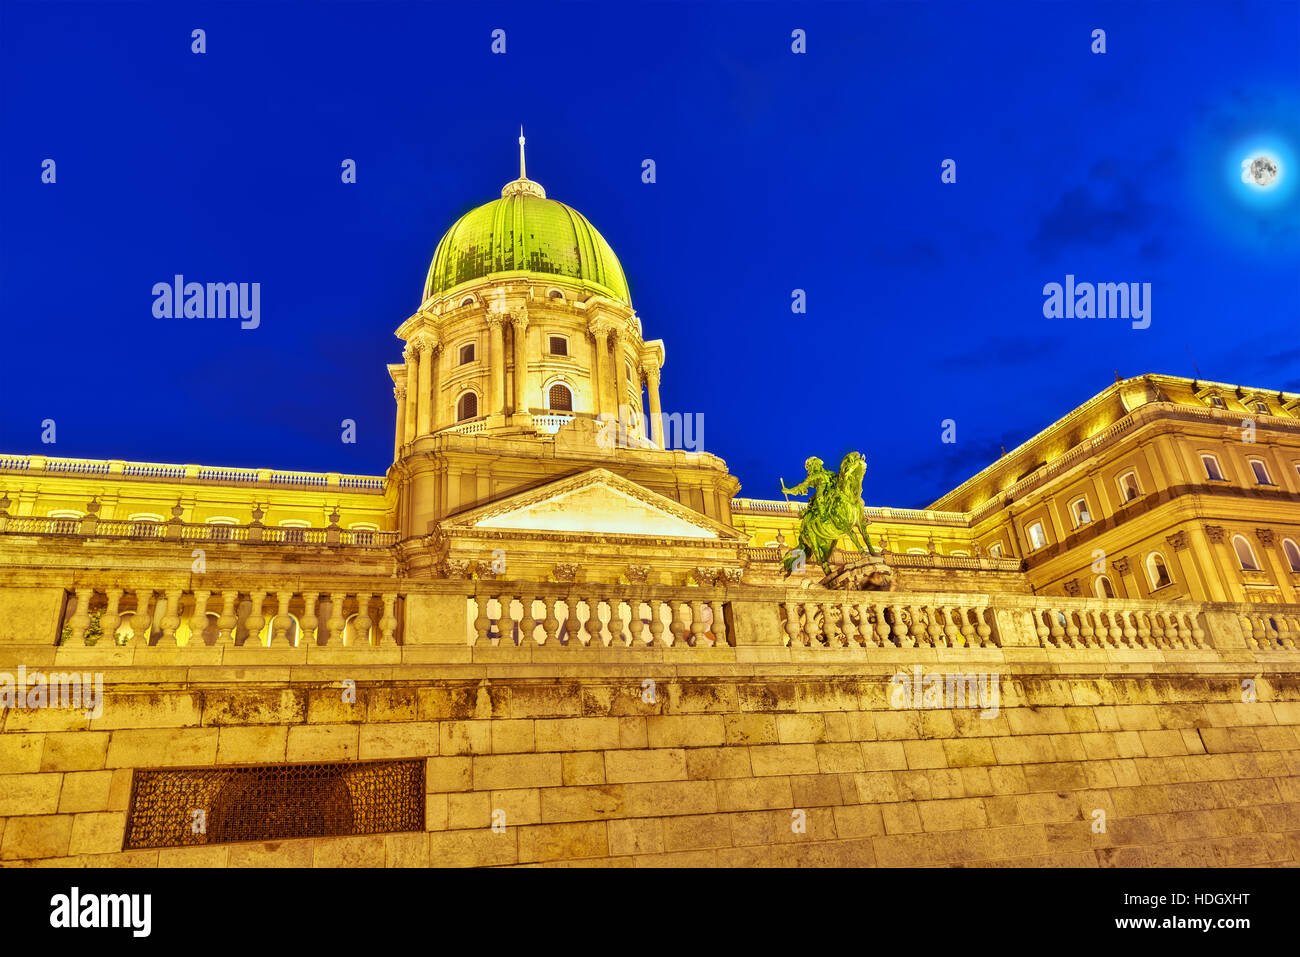 Budapest Royal Castle at night time. Hungary. Stock Photo